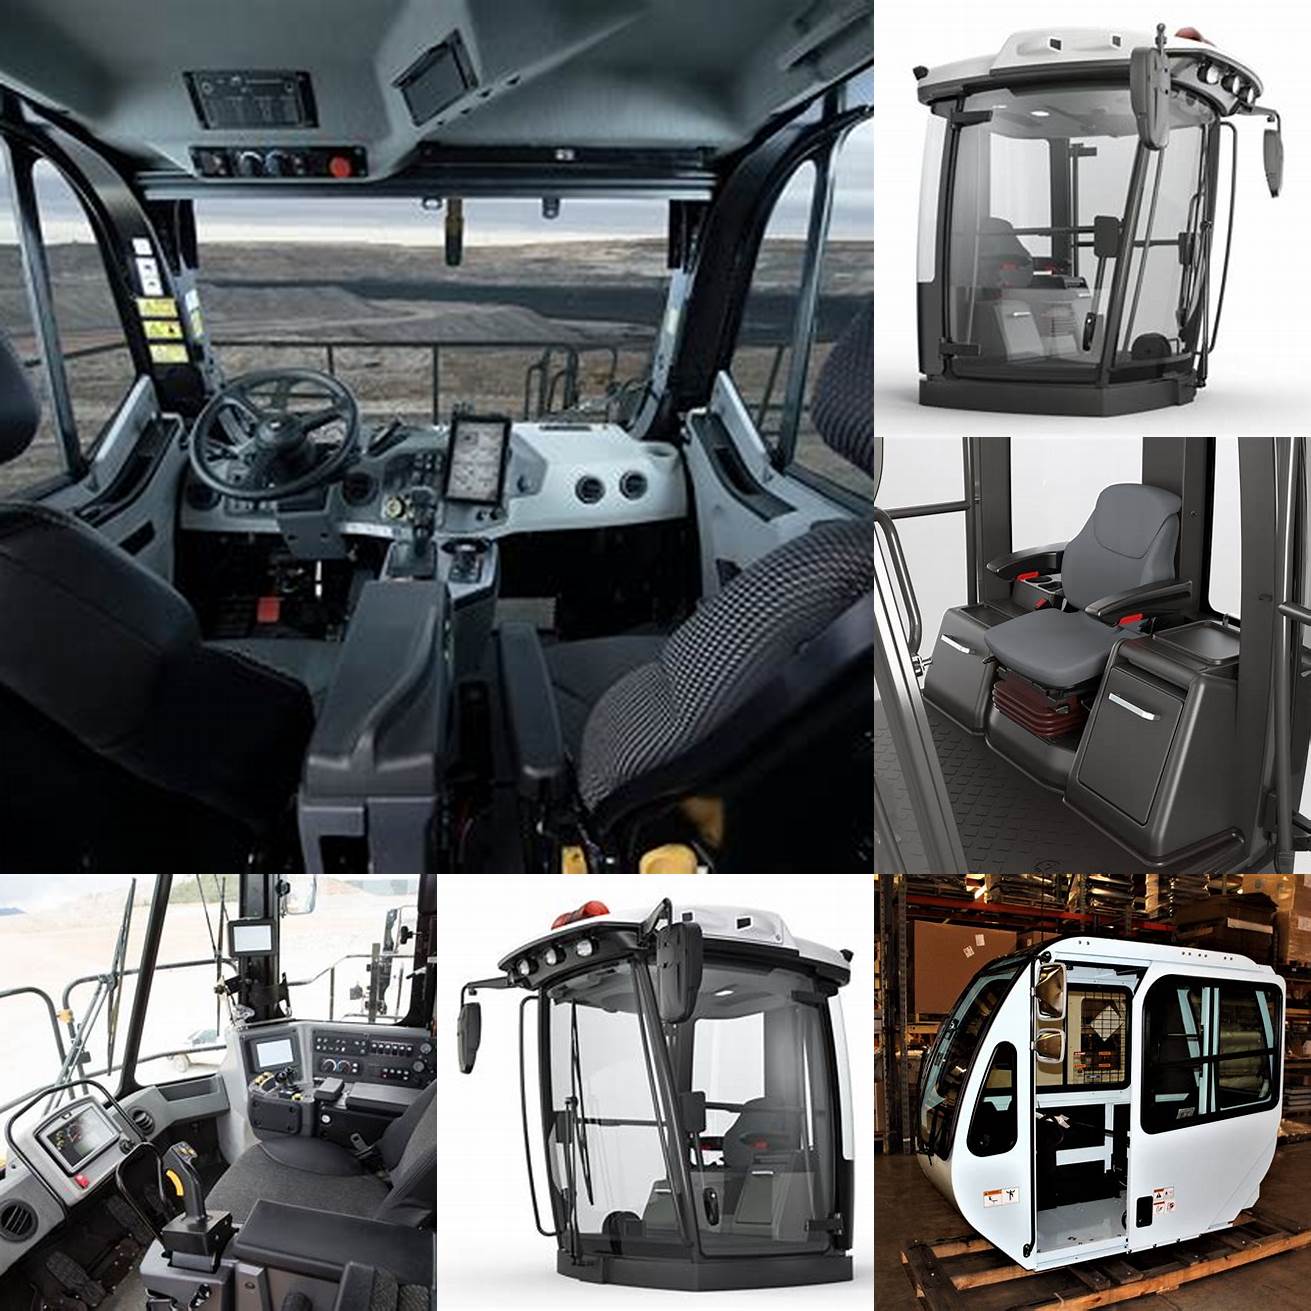 Comfortable and spacious cab design for reduced operator fatigue